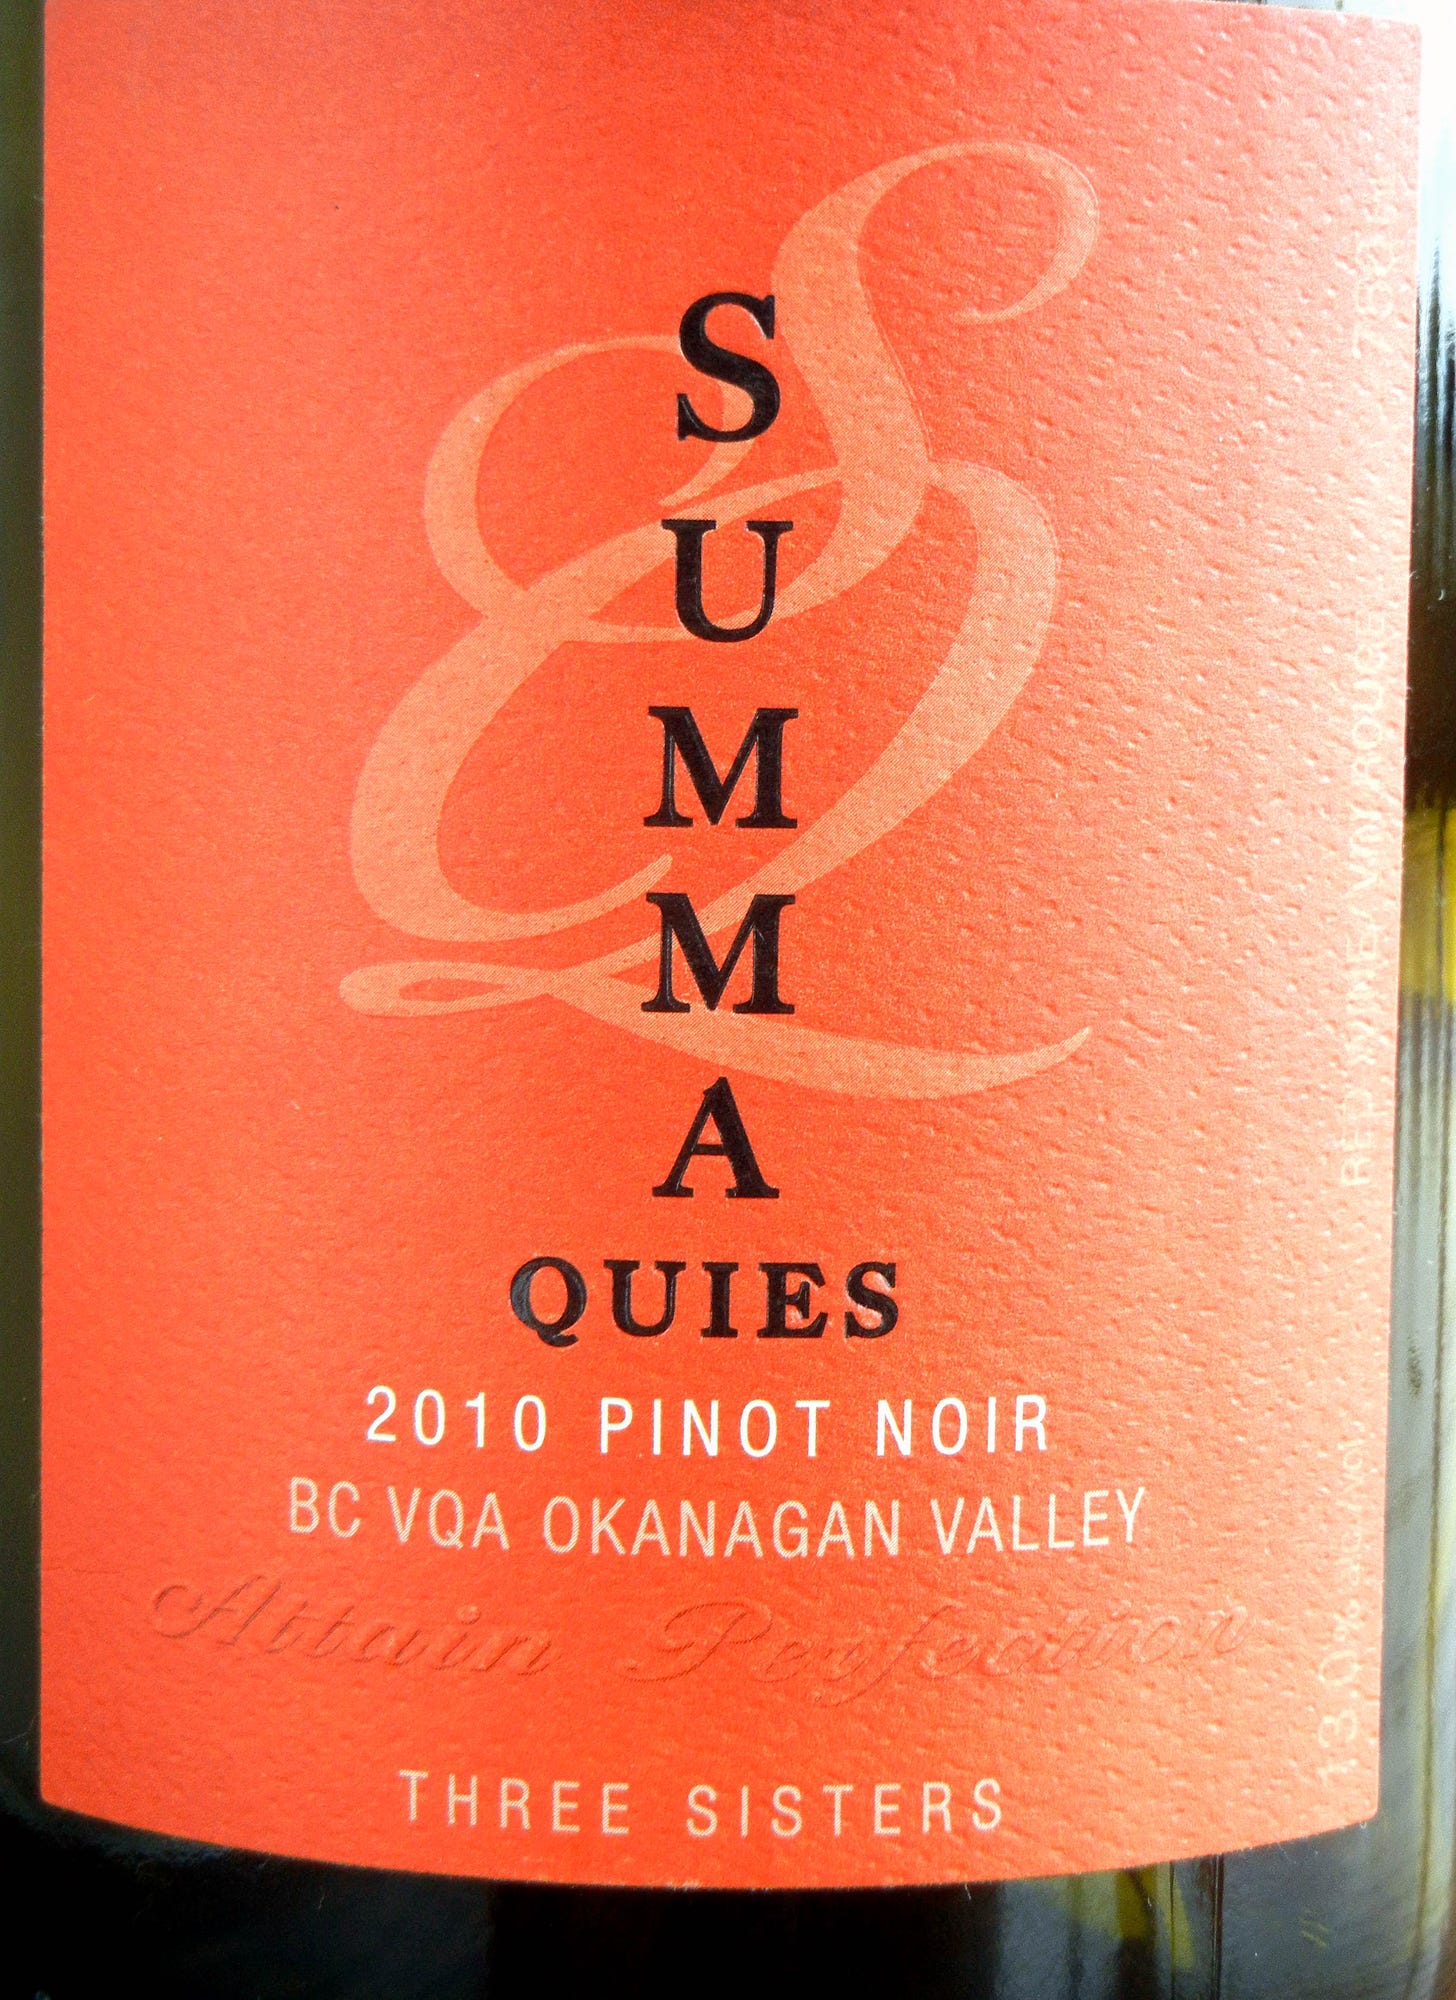 Howling Bluff Summa Quies Three Sisters Pinot Noir 2010 Label - BC Pinot Noir Tasting Review 10